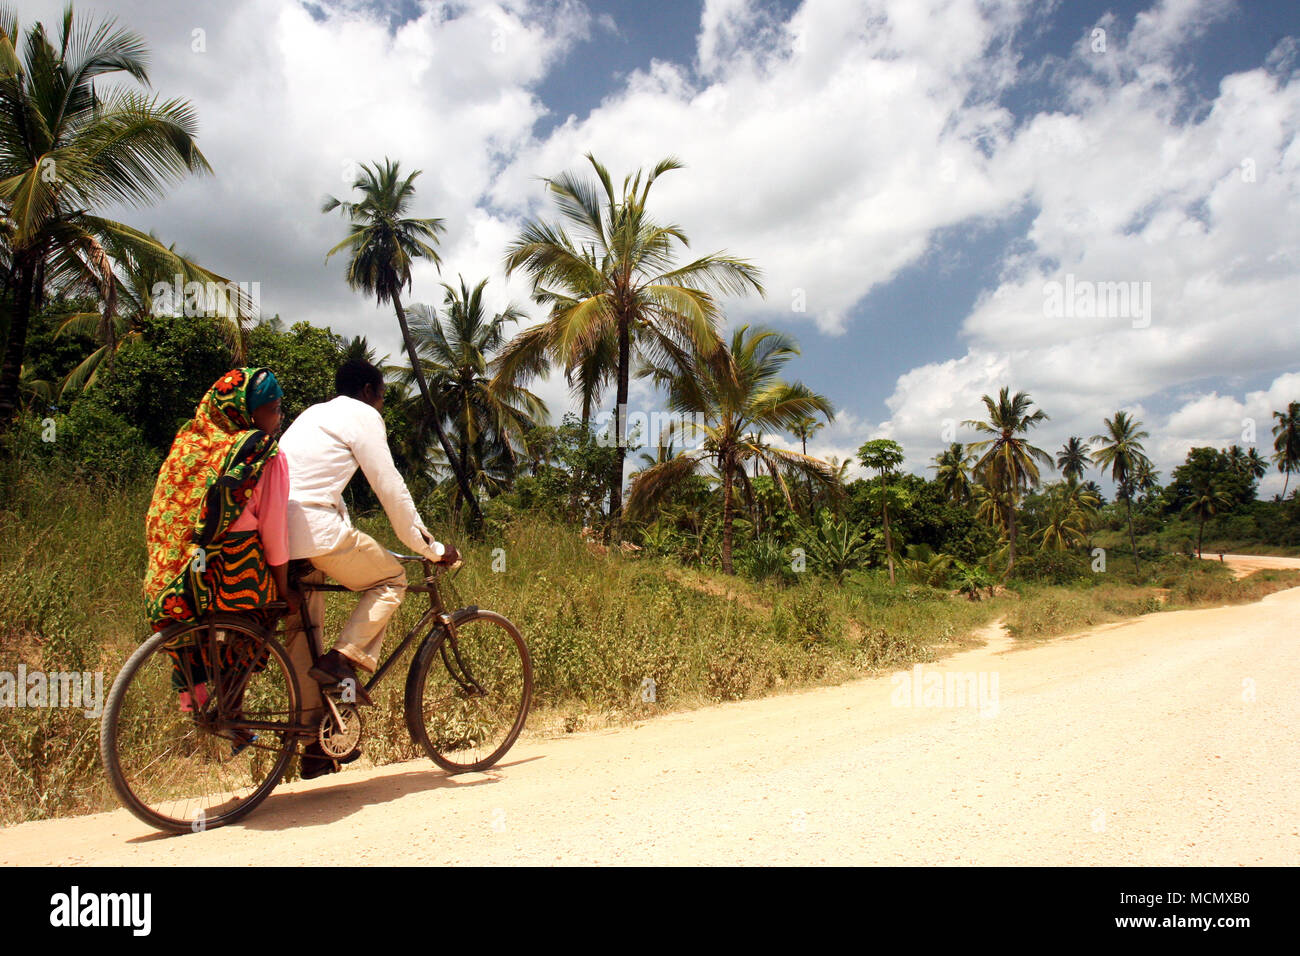 A couple riding their bicycle along a dusty road, Dar es Alaam, Tanzania Stock Photo